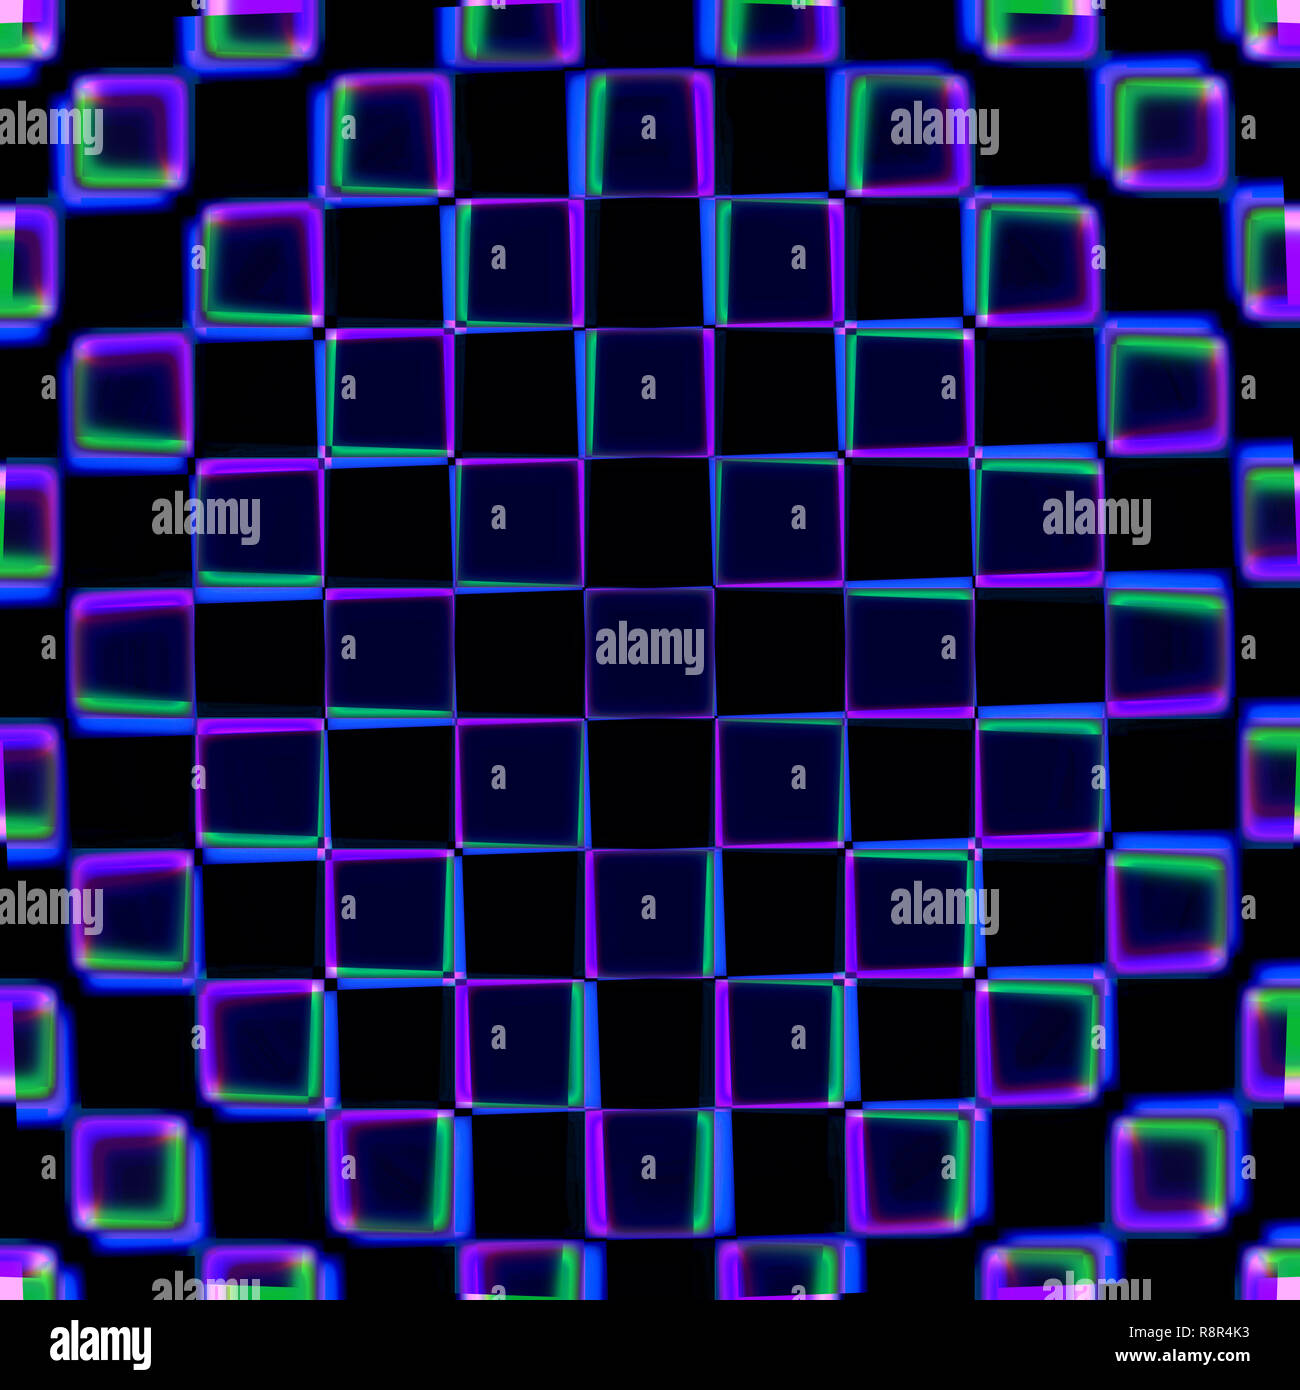 Selective focus purple and blue squares pattern on a black background Stock Photo